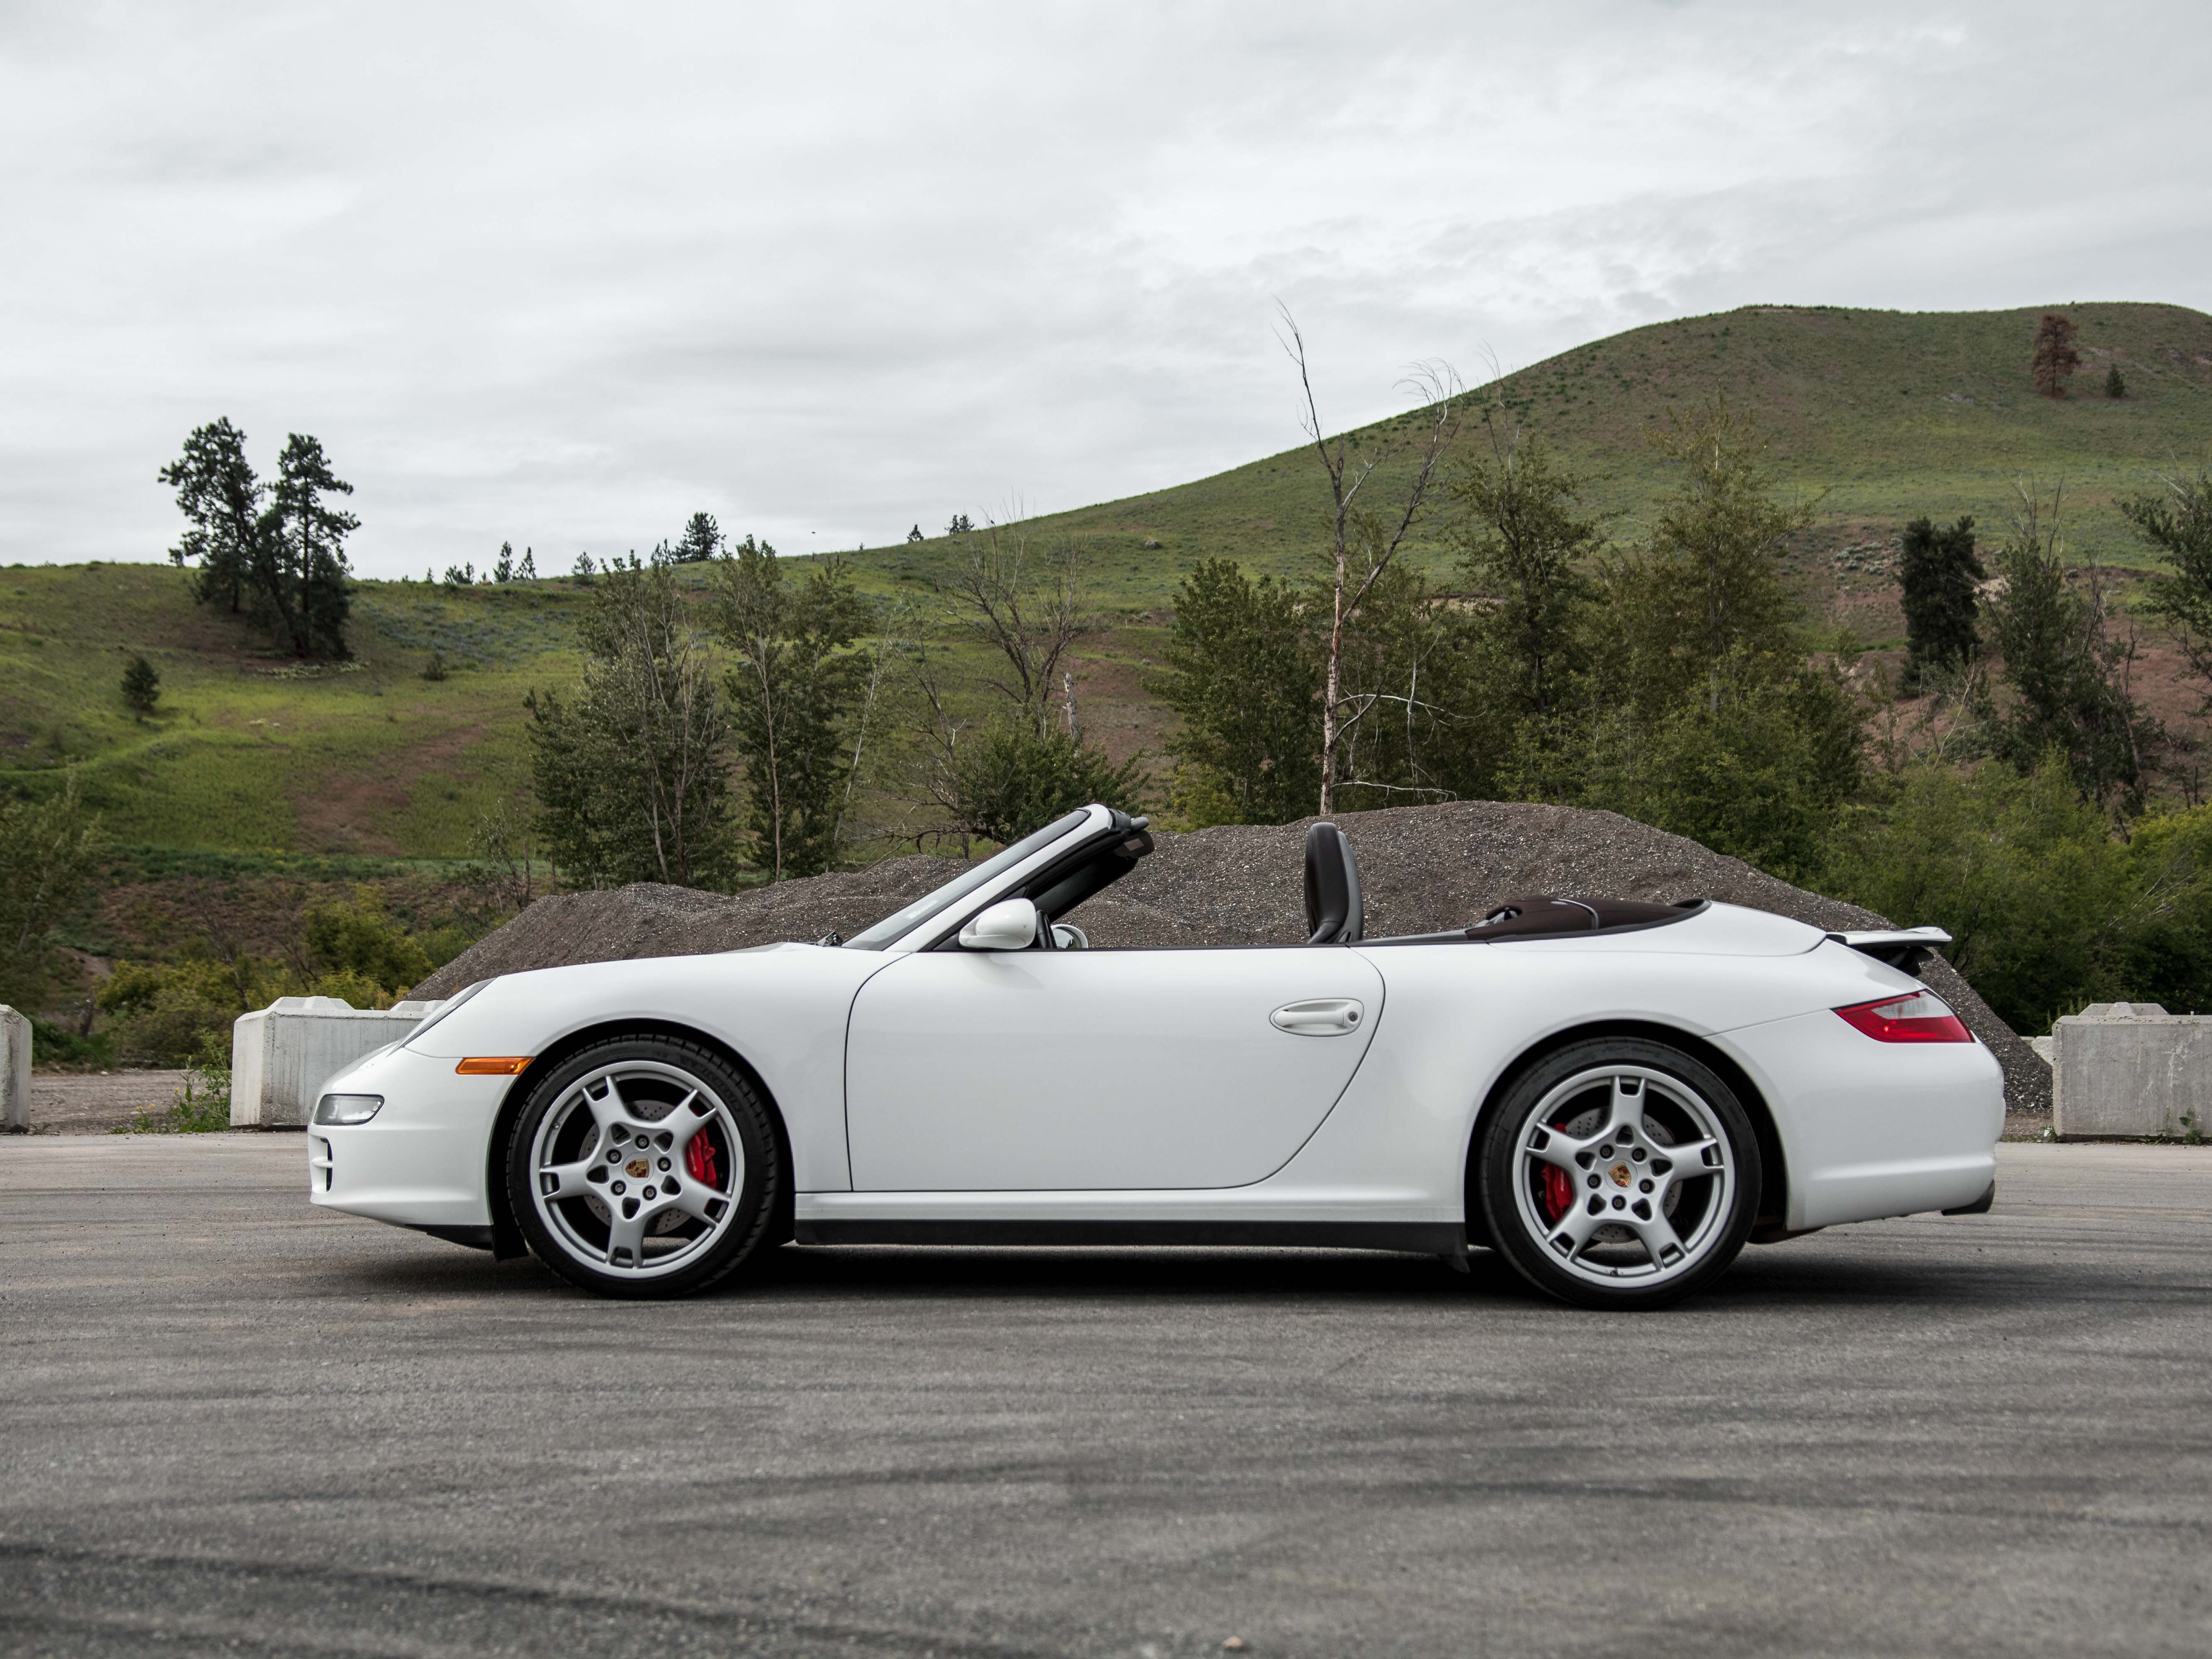 PreOwned 2007 Porsche 911 CARRERA 4S SUPERCHARGED